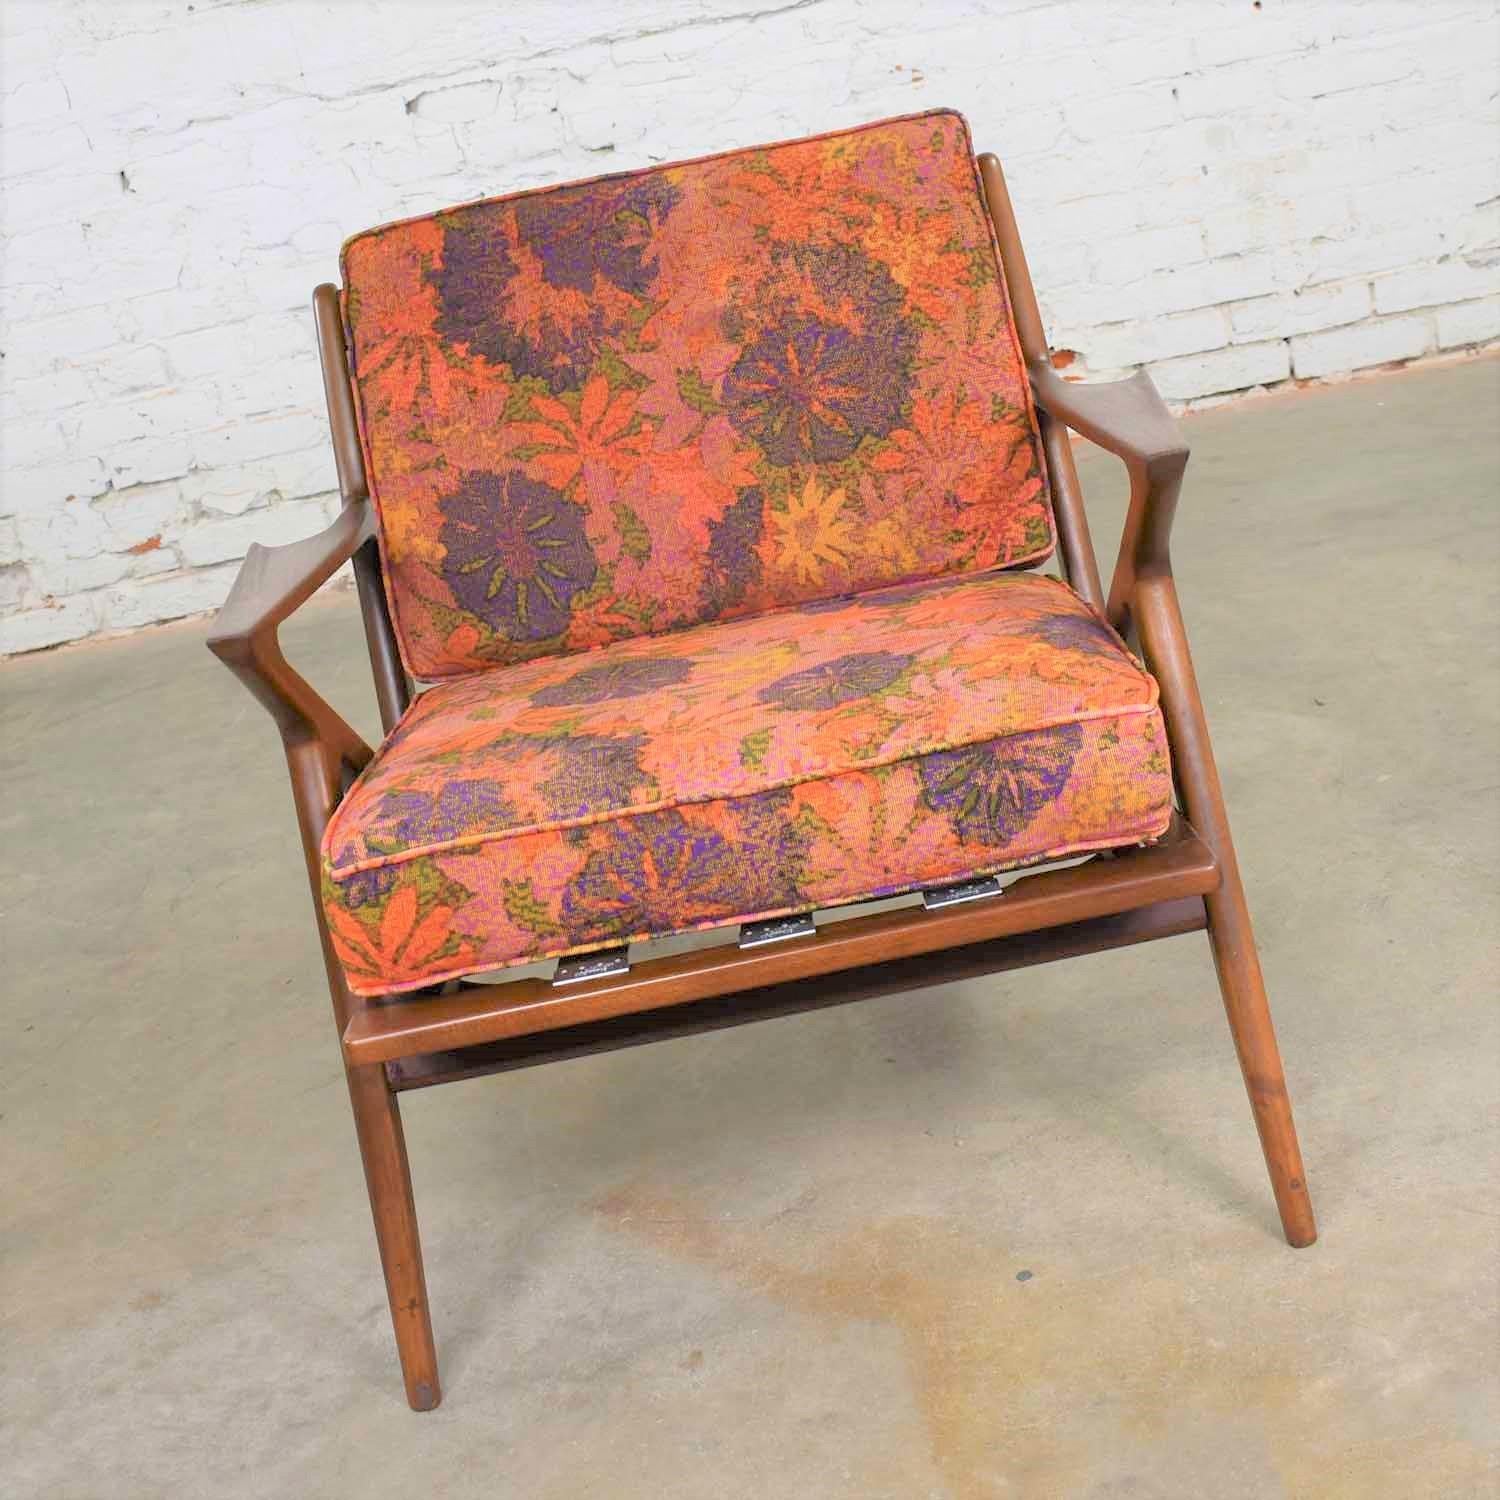 Incredible Scandinavian Modern Z-lounge chair designed by Poul Jensen for Selig. It is wearing its original mod floral fabric in a red, orange, purple, yellow mix. It is in fabulous restored condition. You may still see a couple very small places on